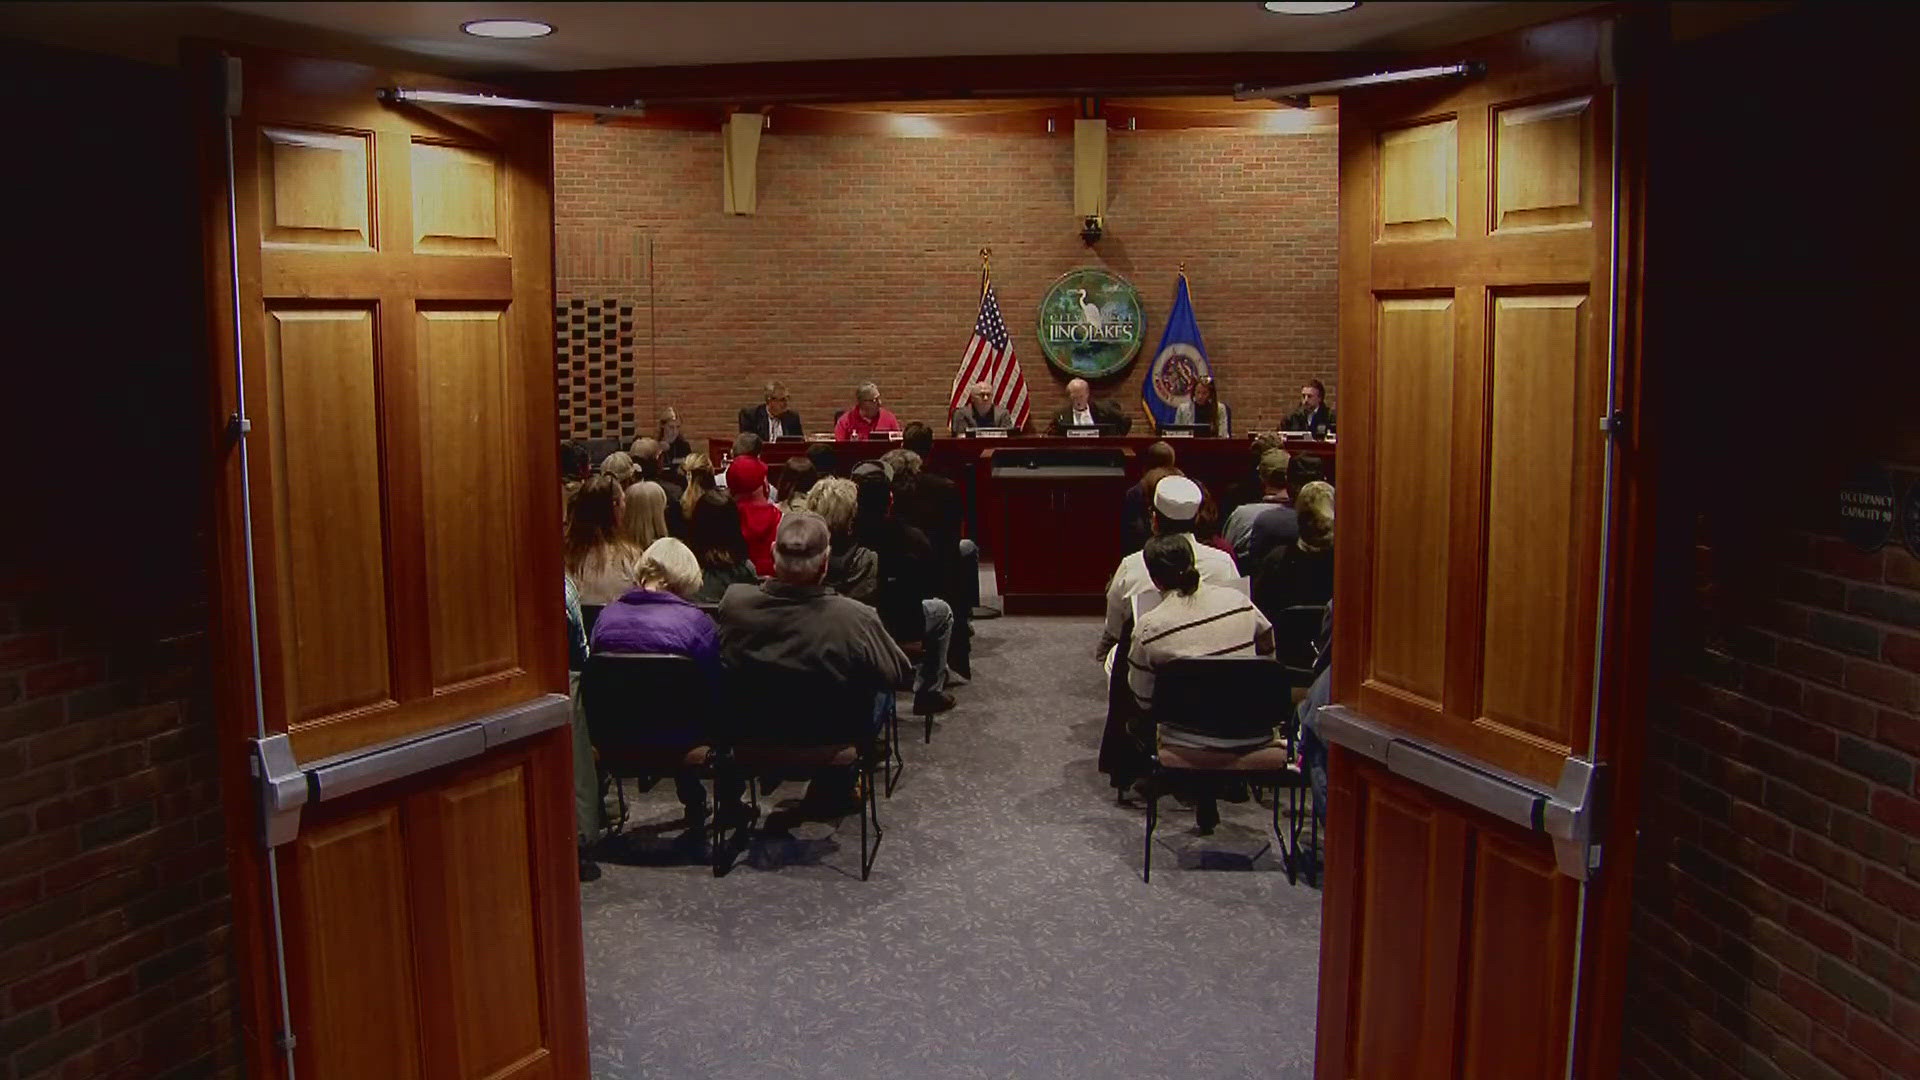 The city council members are considering a moratorium on any new building within the city.